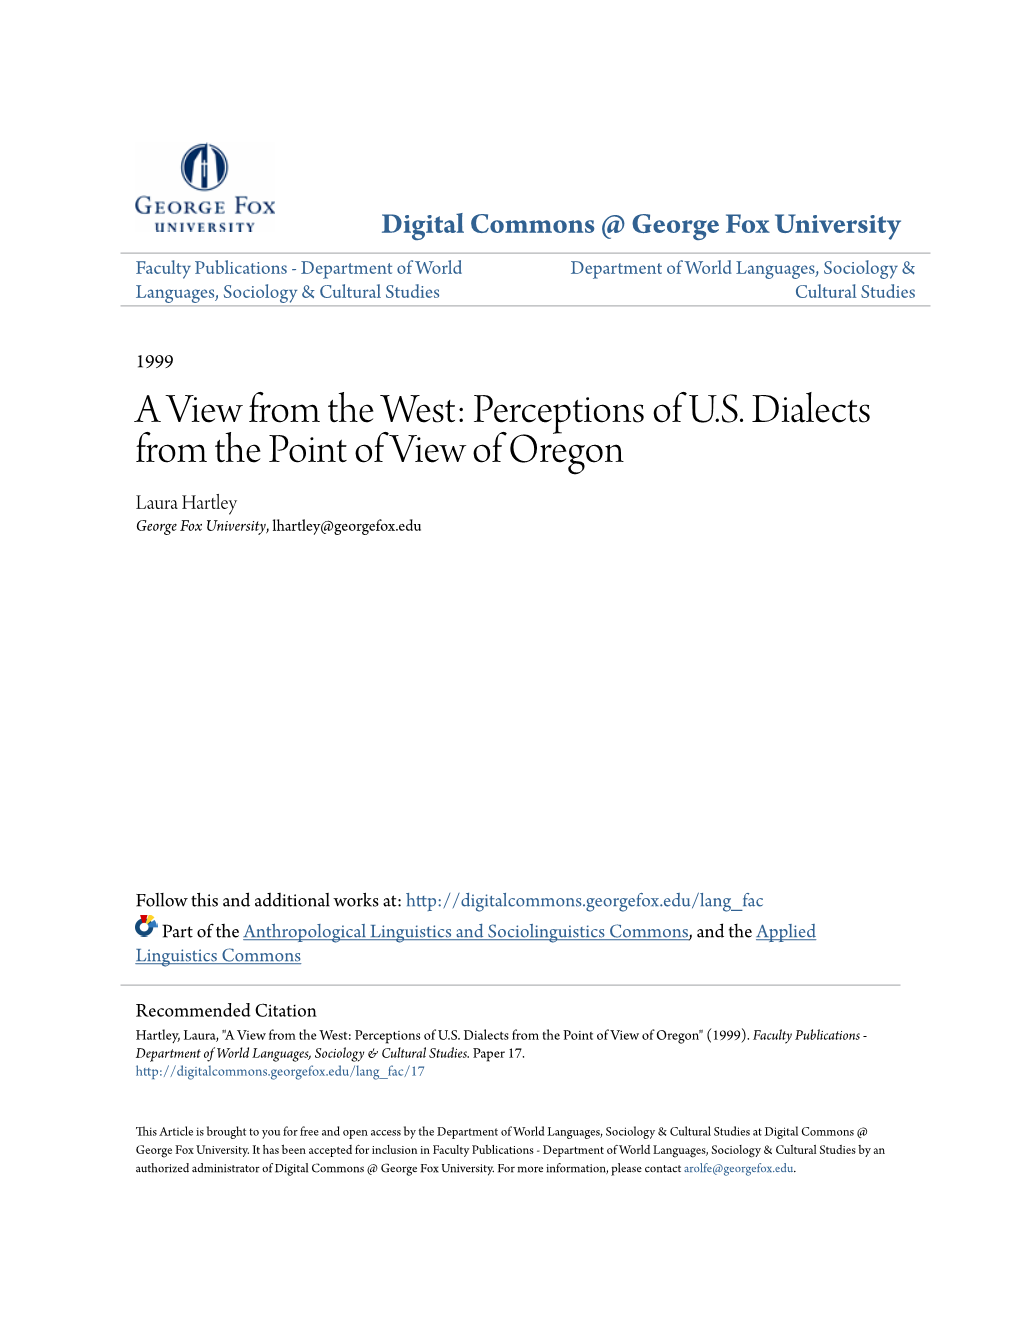 Perceptions of US Dialects from the Point of View of Oregon